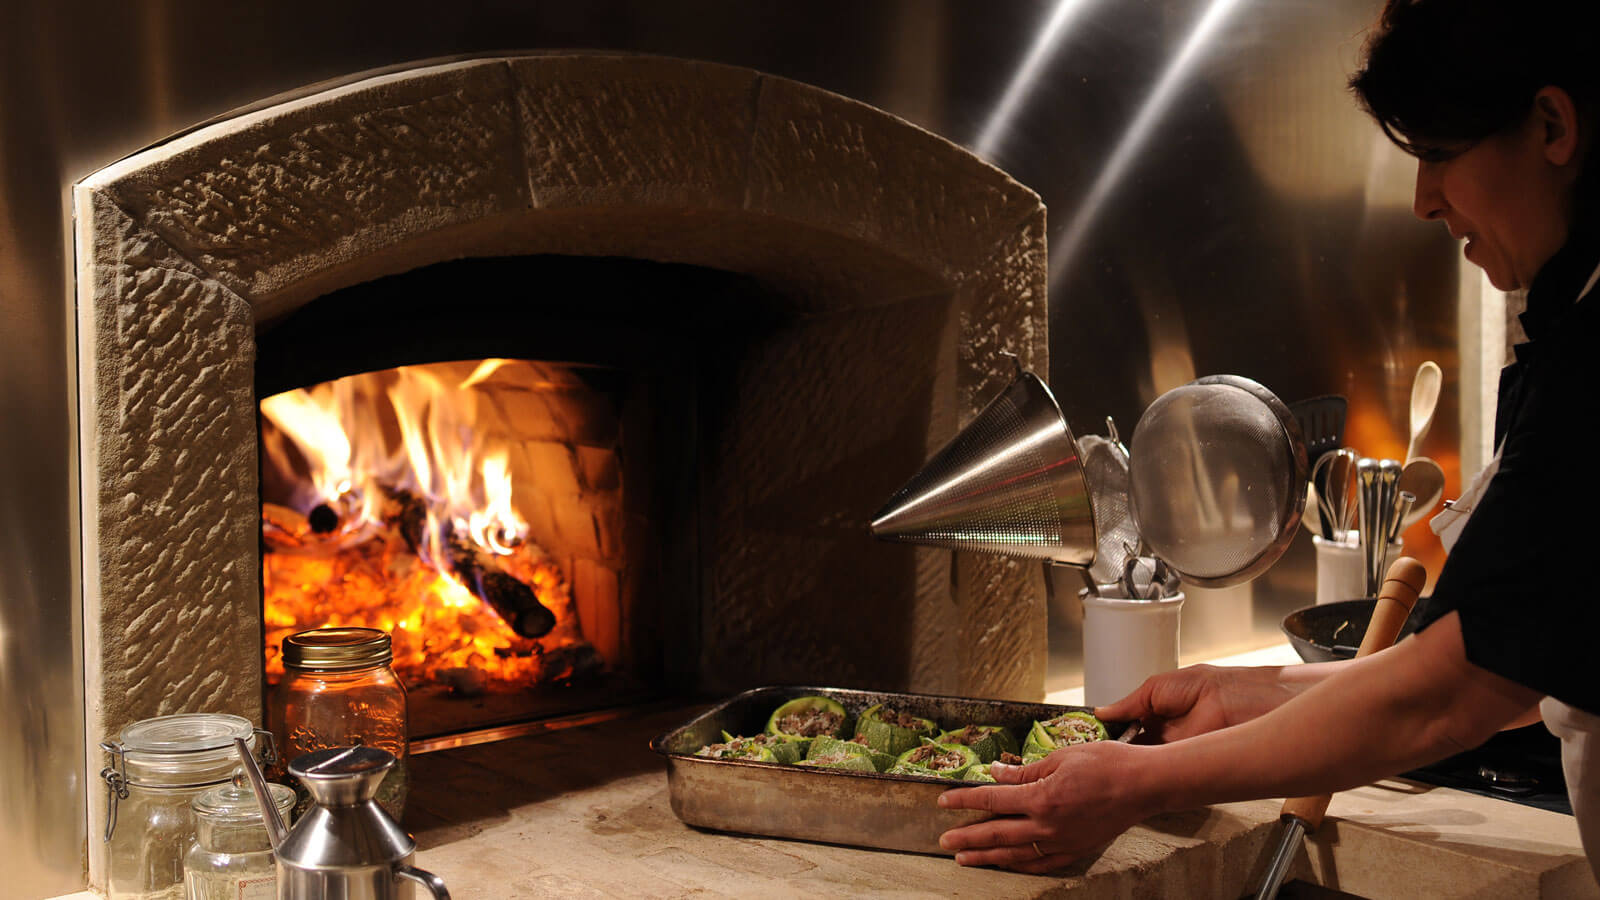 We Love To Cook Using The Traditional Wood Fired Bread Oven